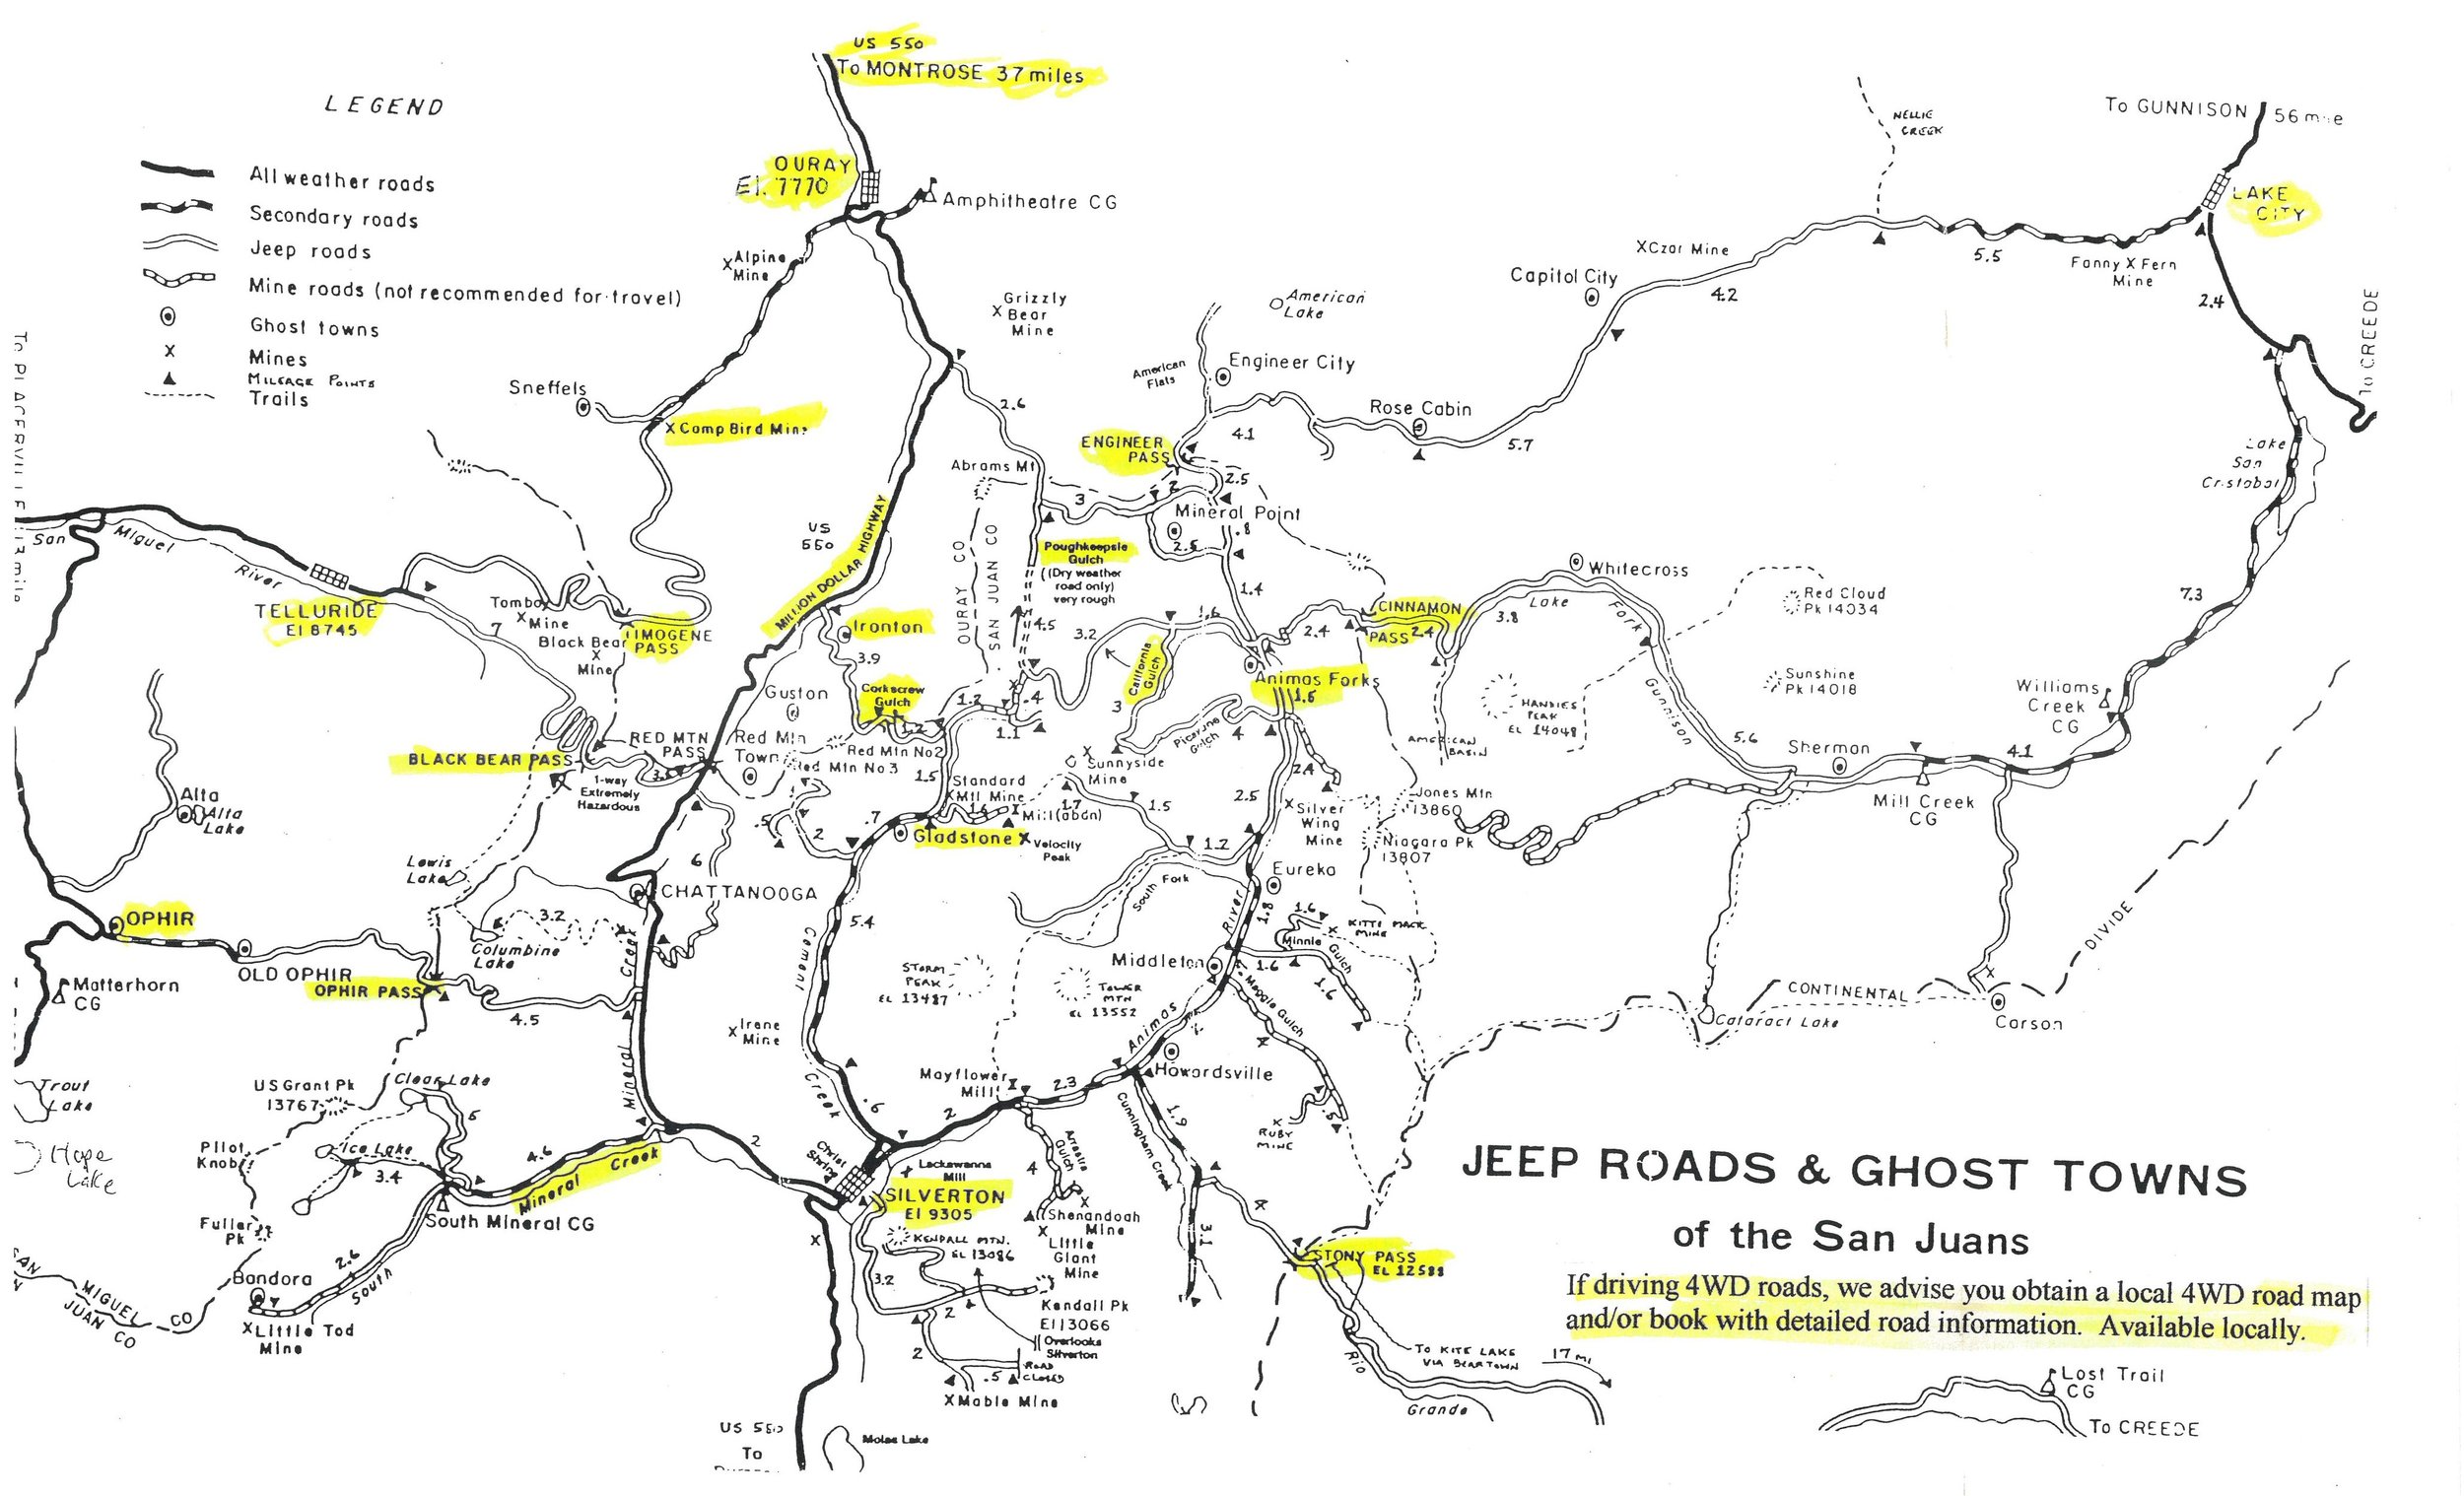 Jeep road and ghost town map